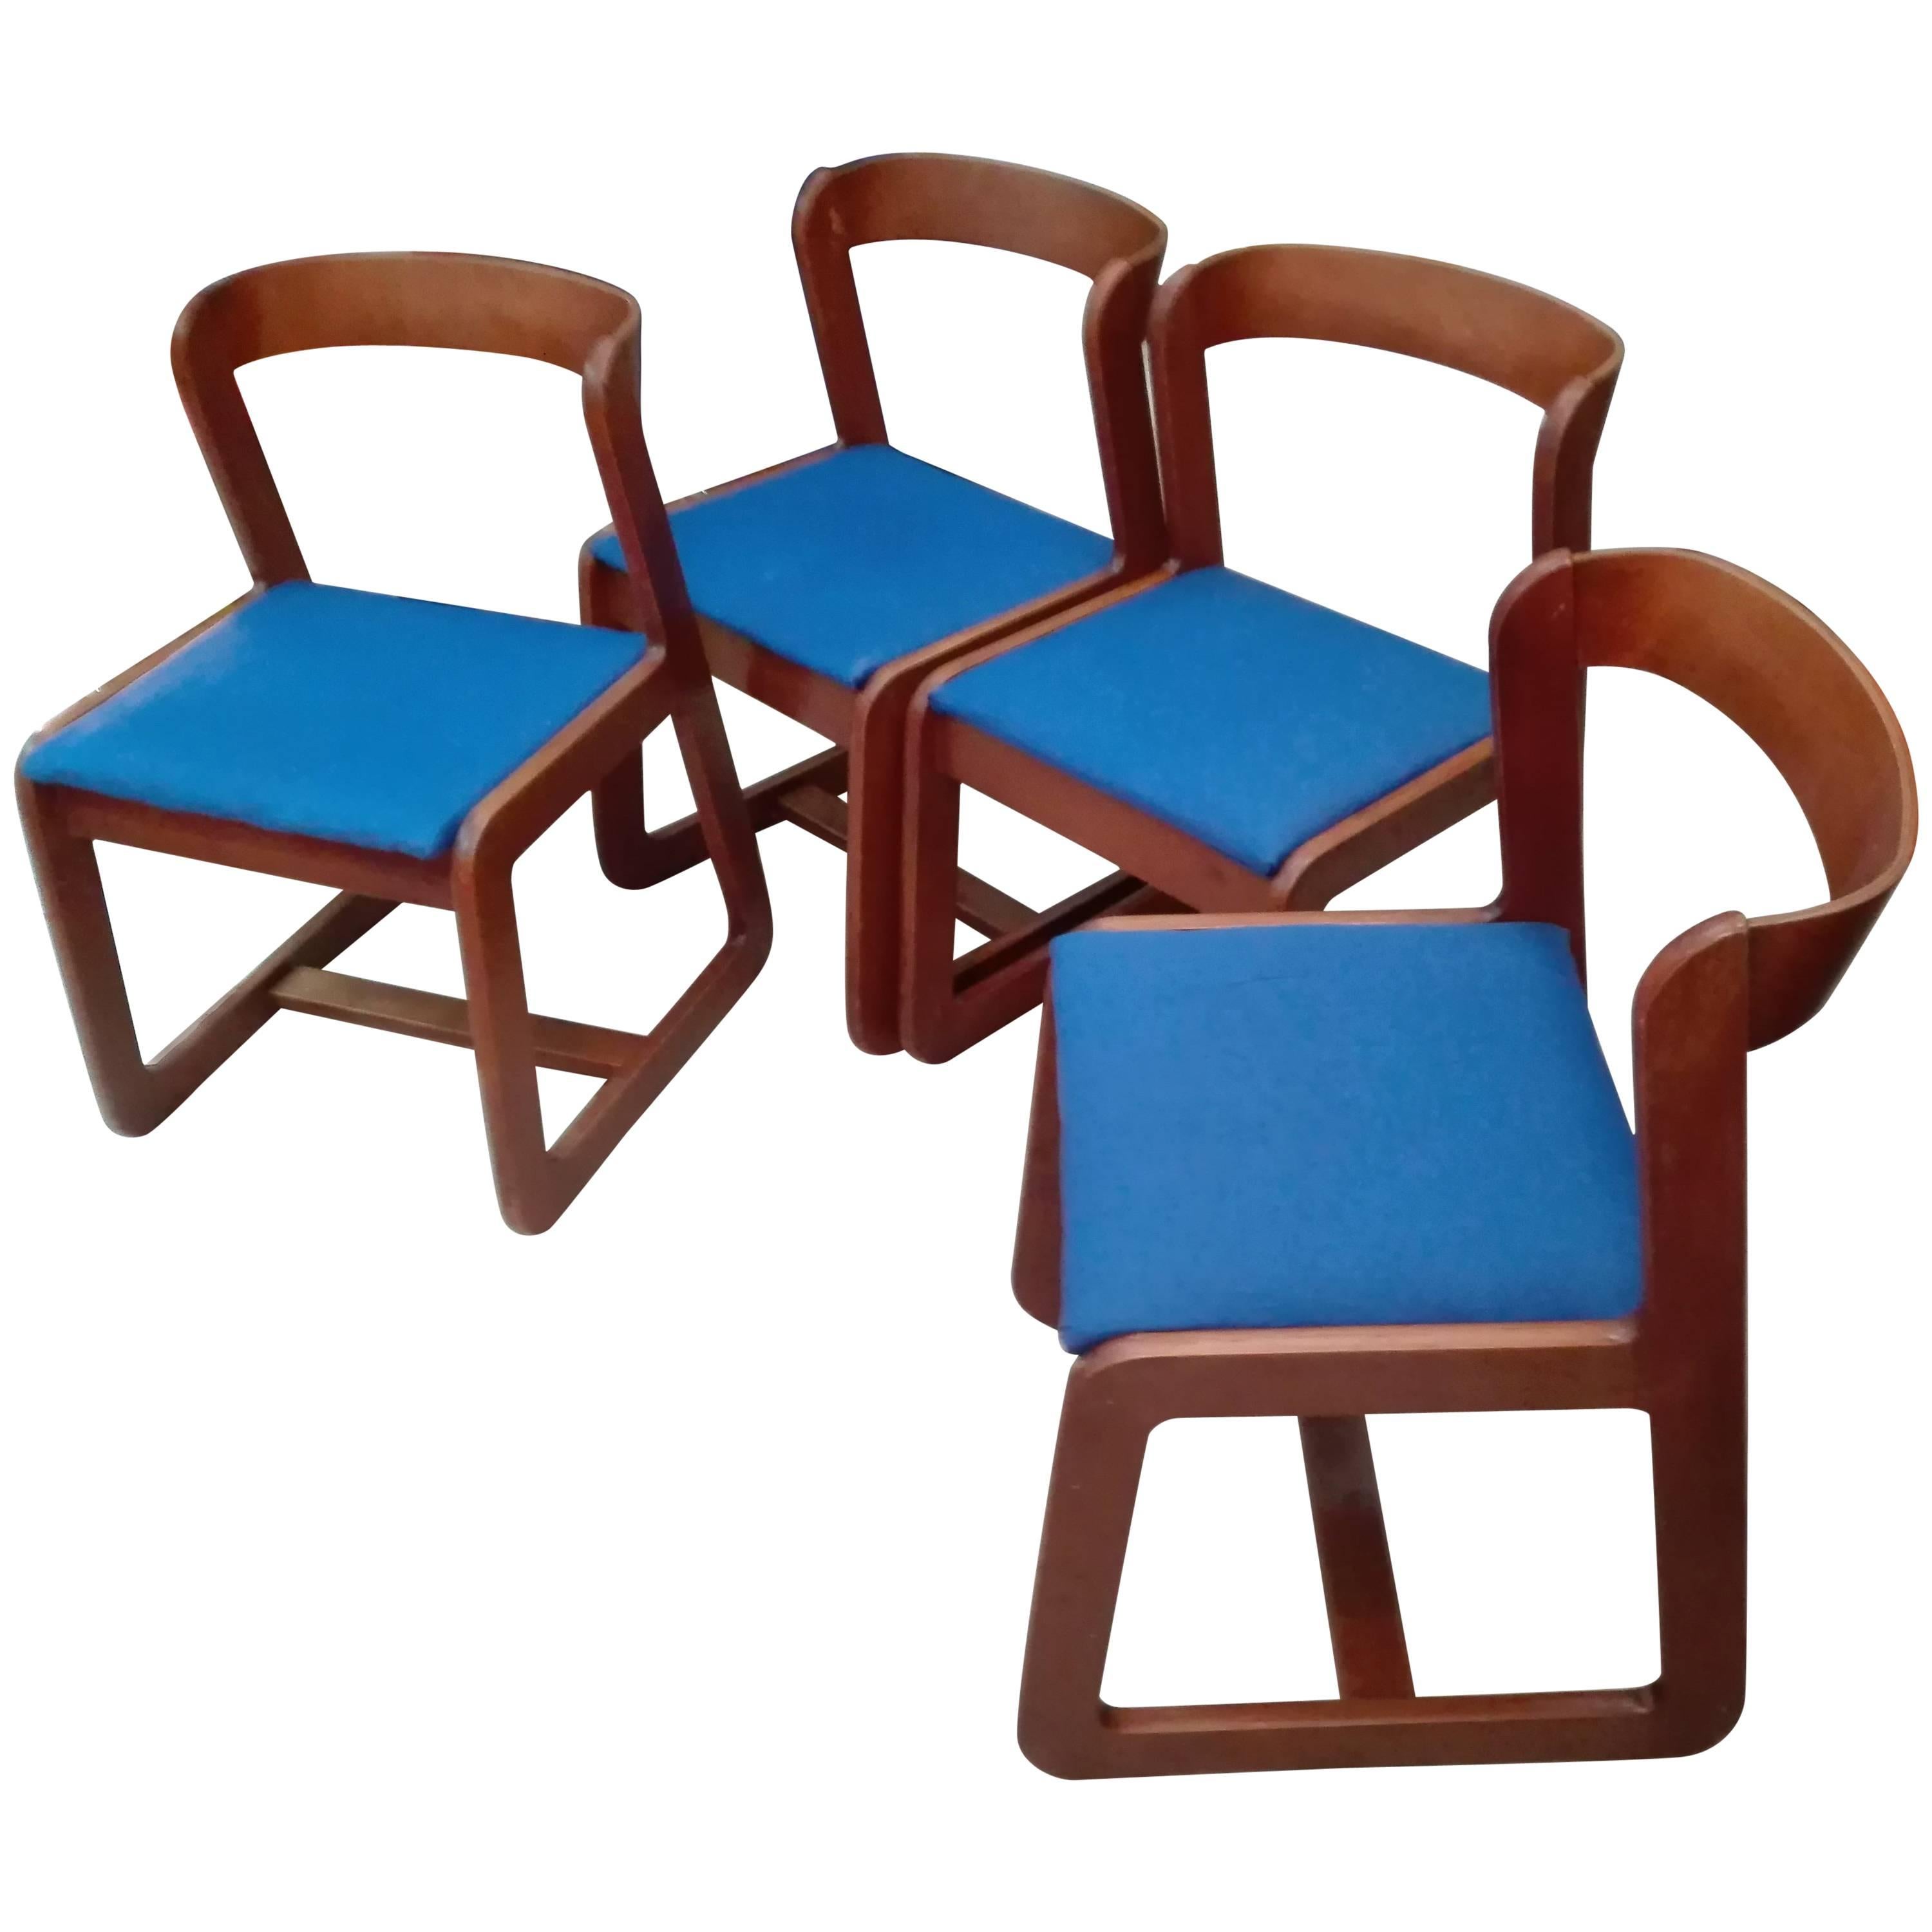 Chairs by Willy Rizzo for Mario Sabot, 1970s, Set of Four